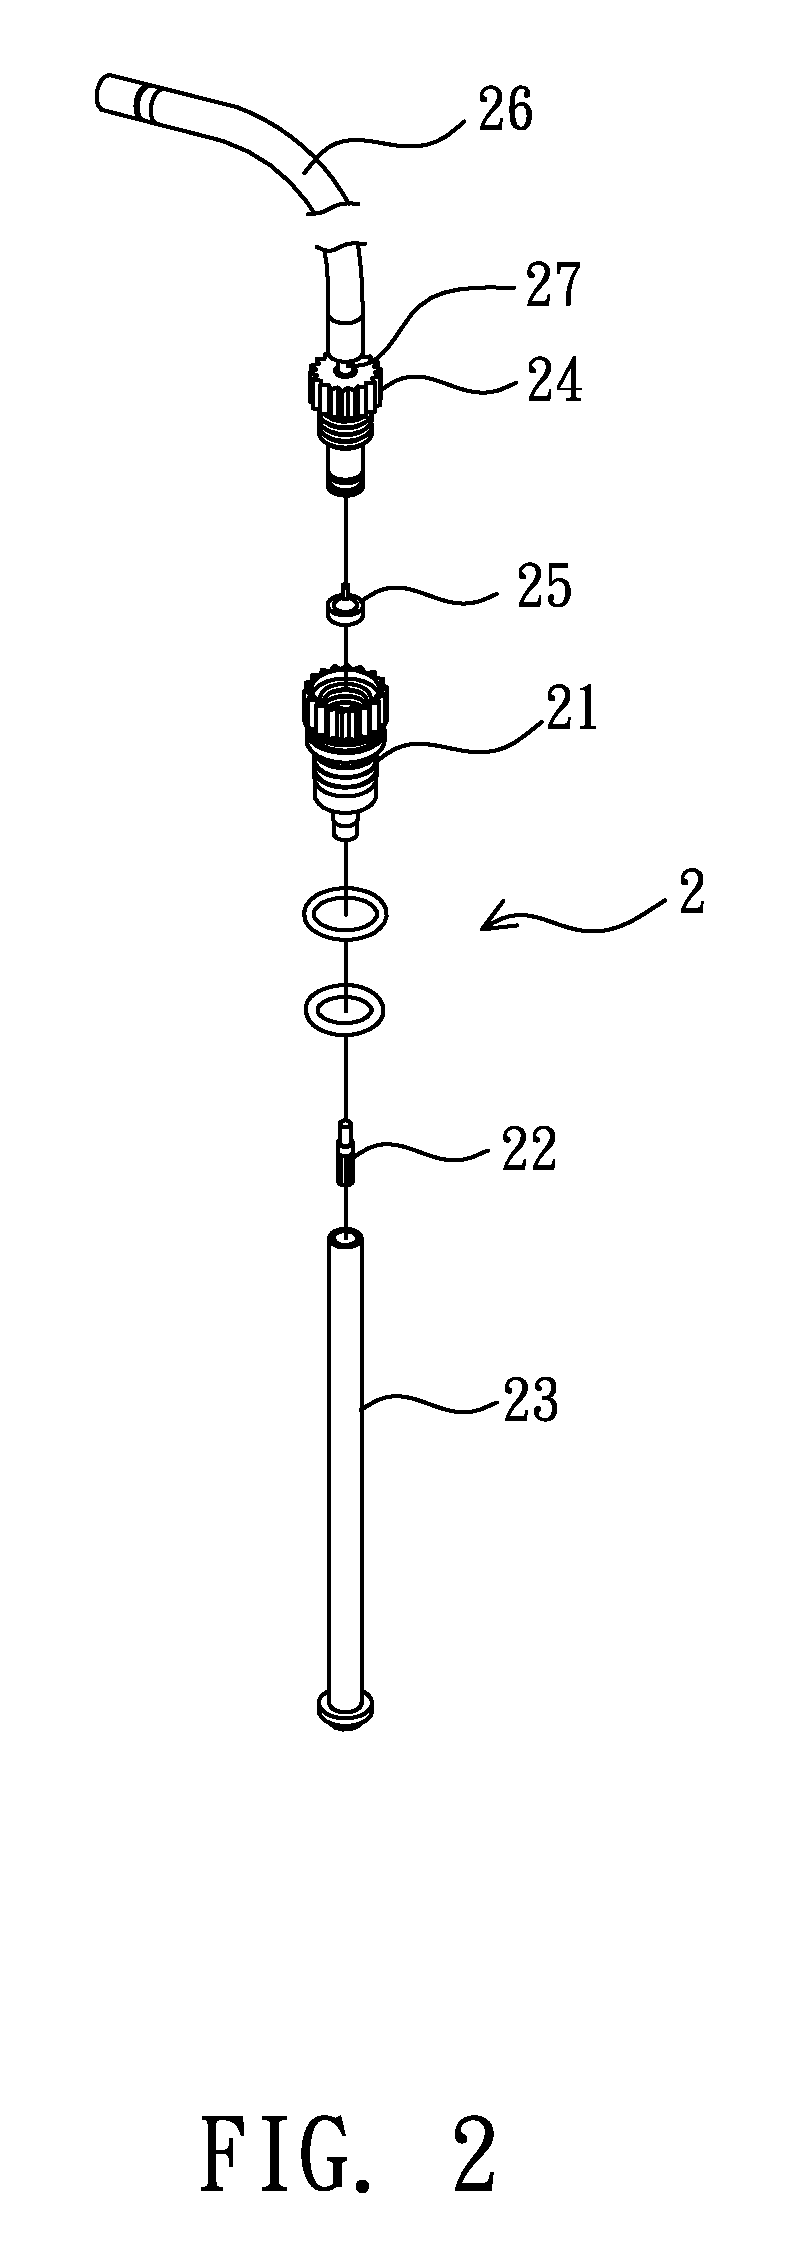 Hand-held gas combustion apparatus